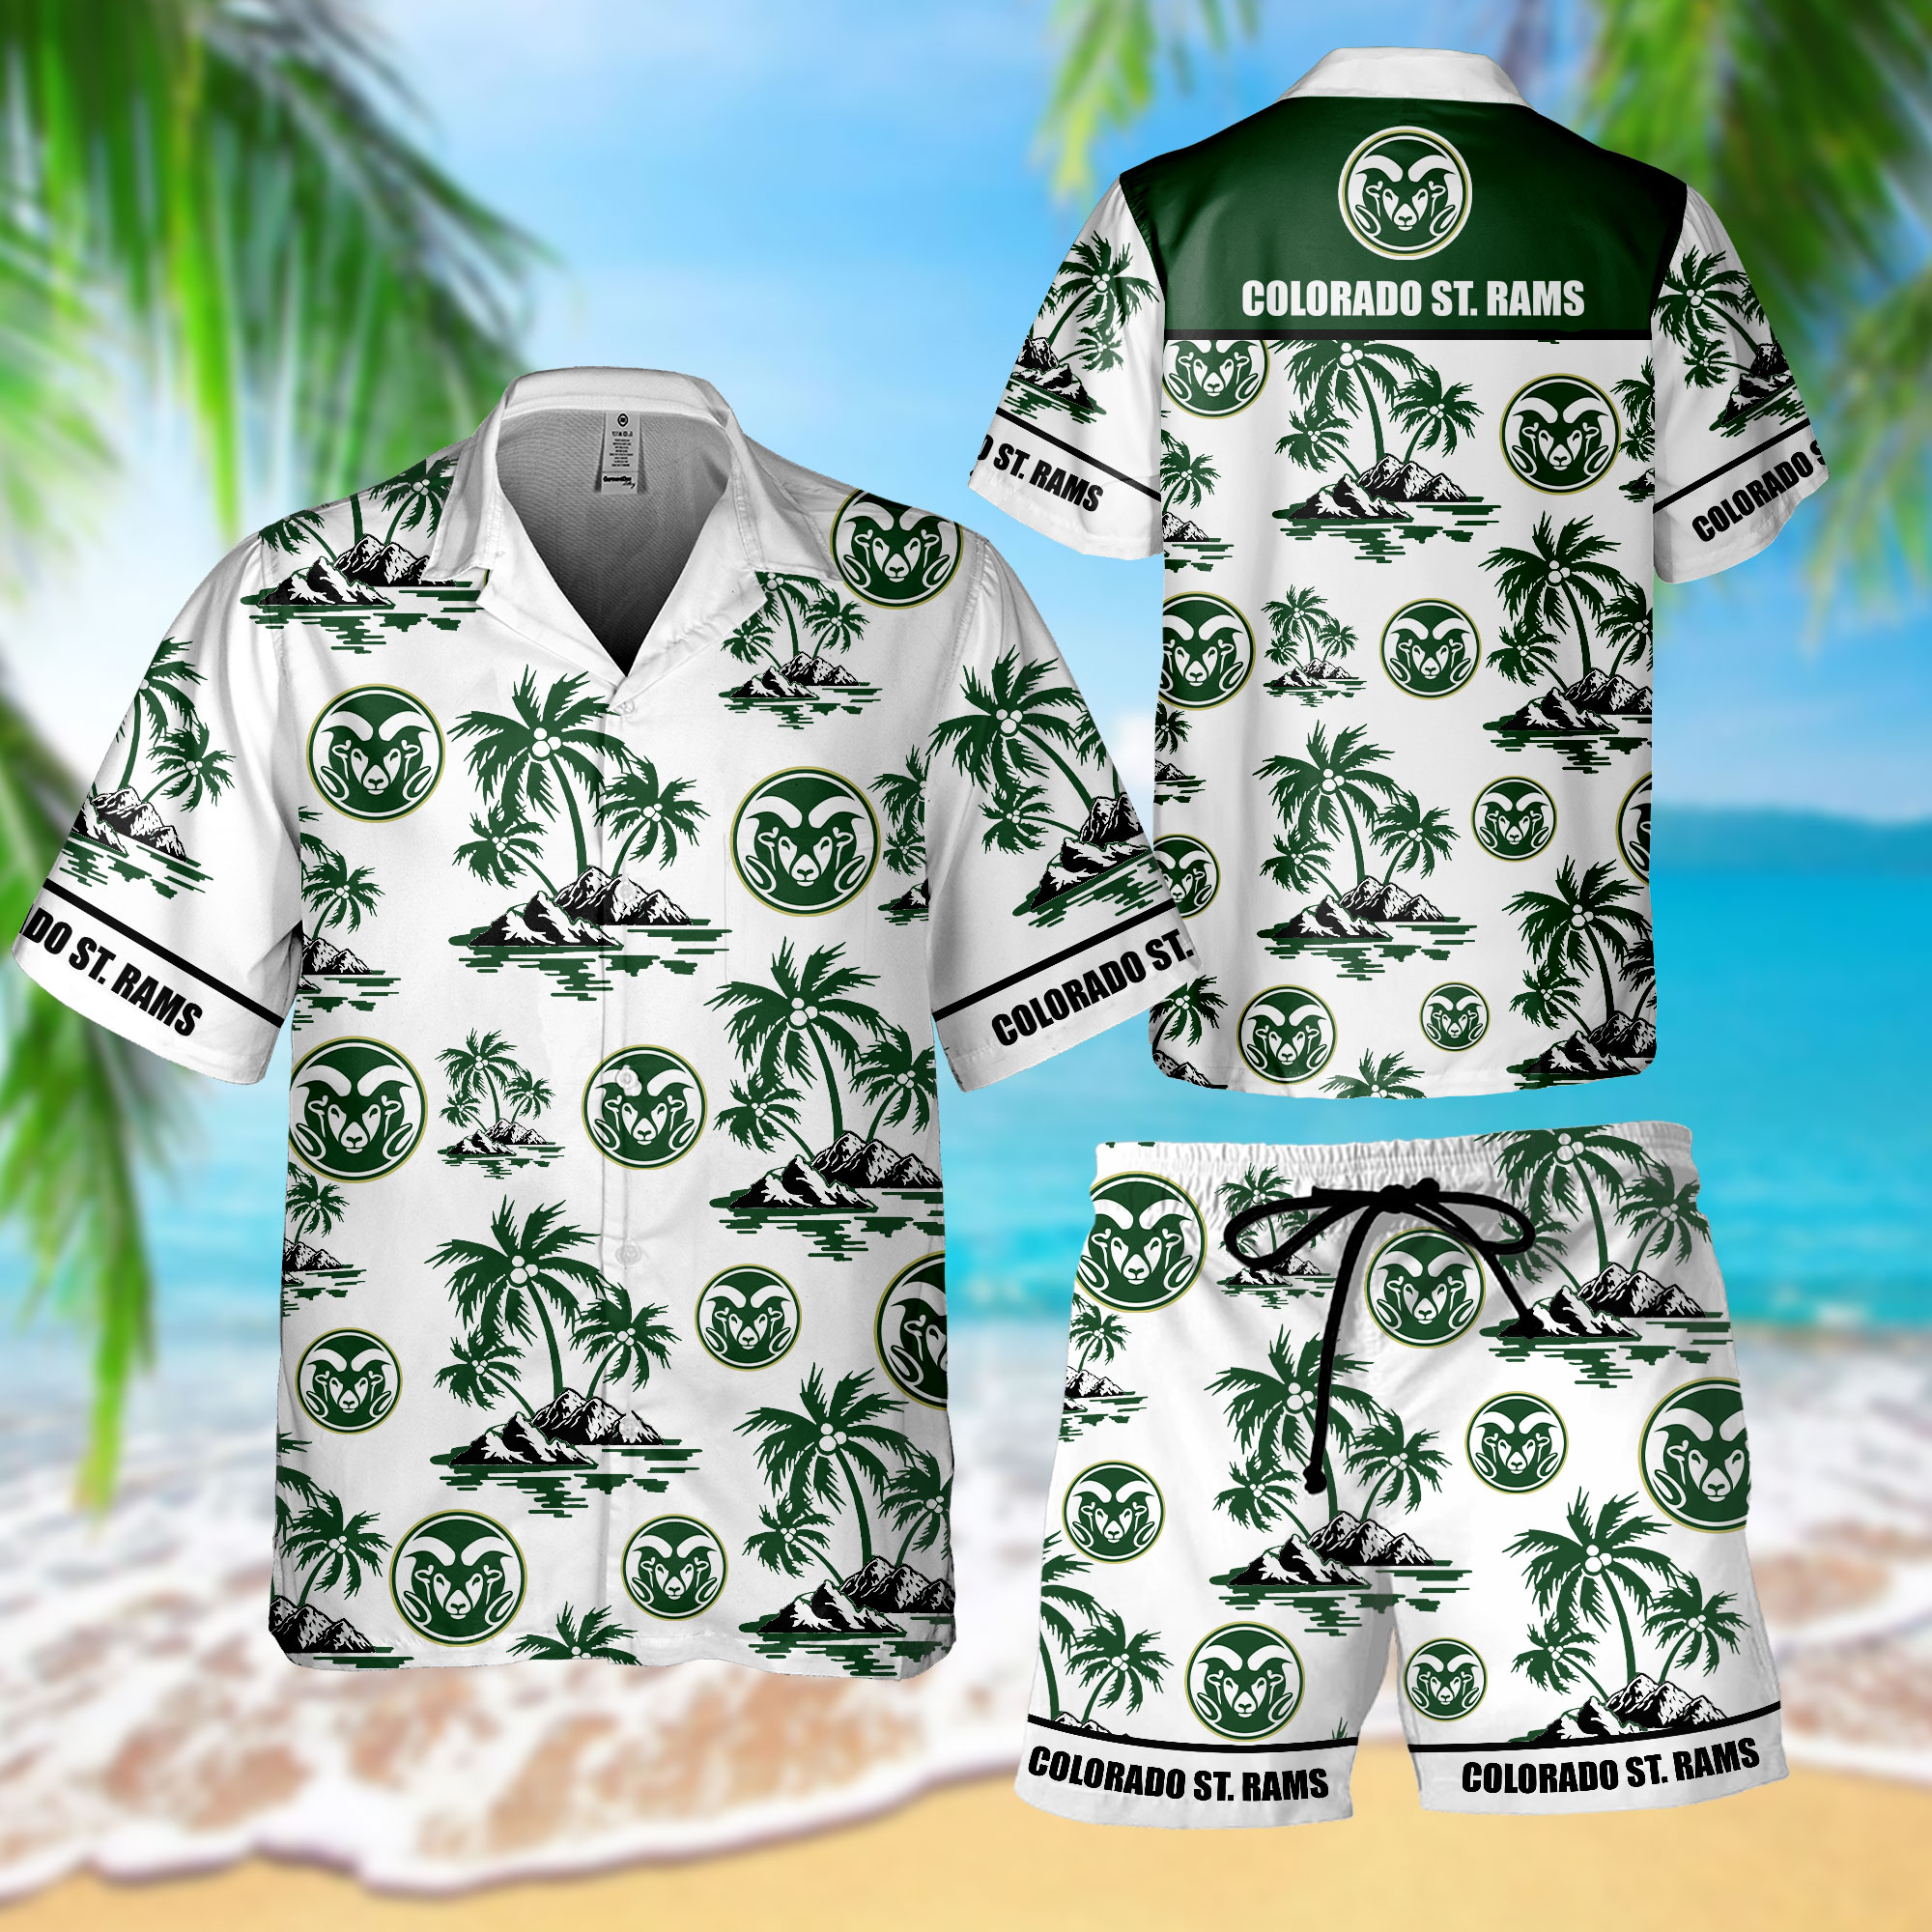 Let me show you about some combo hawaiian shirt so cool in this weather 27